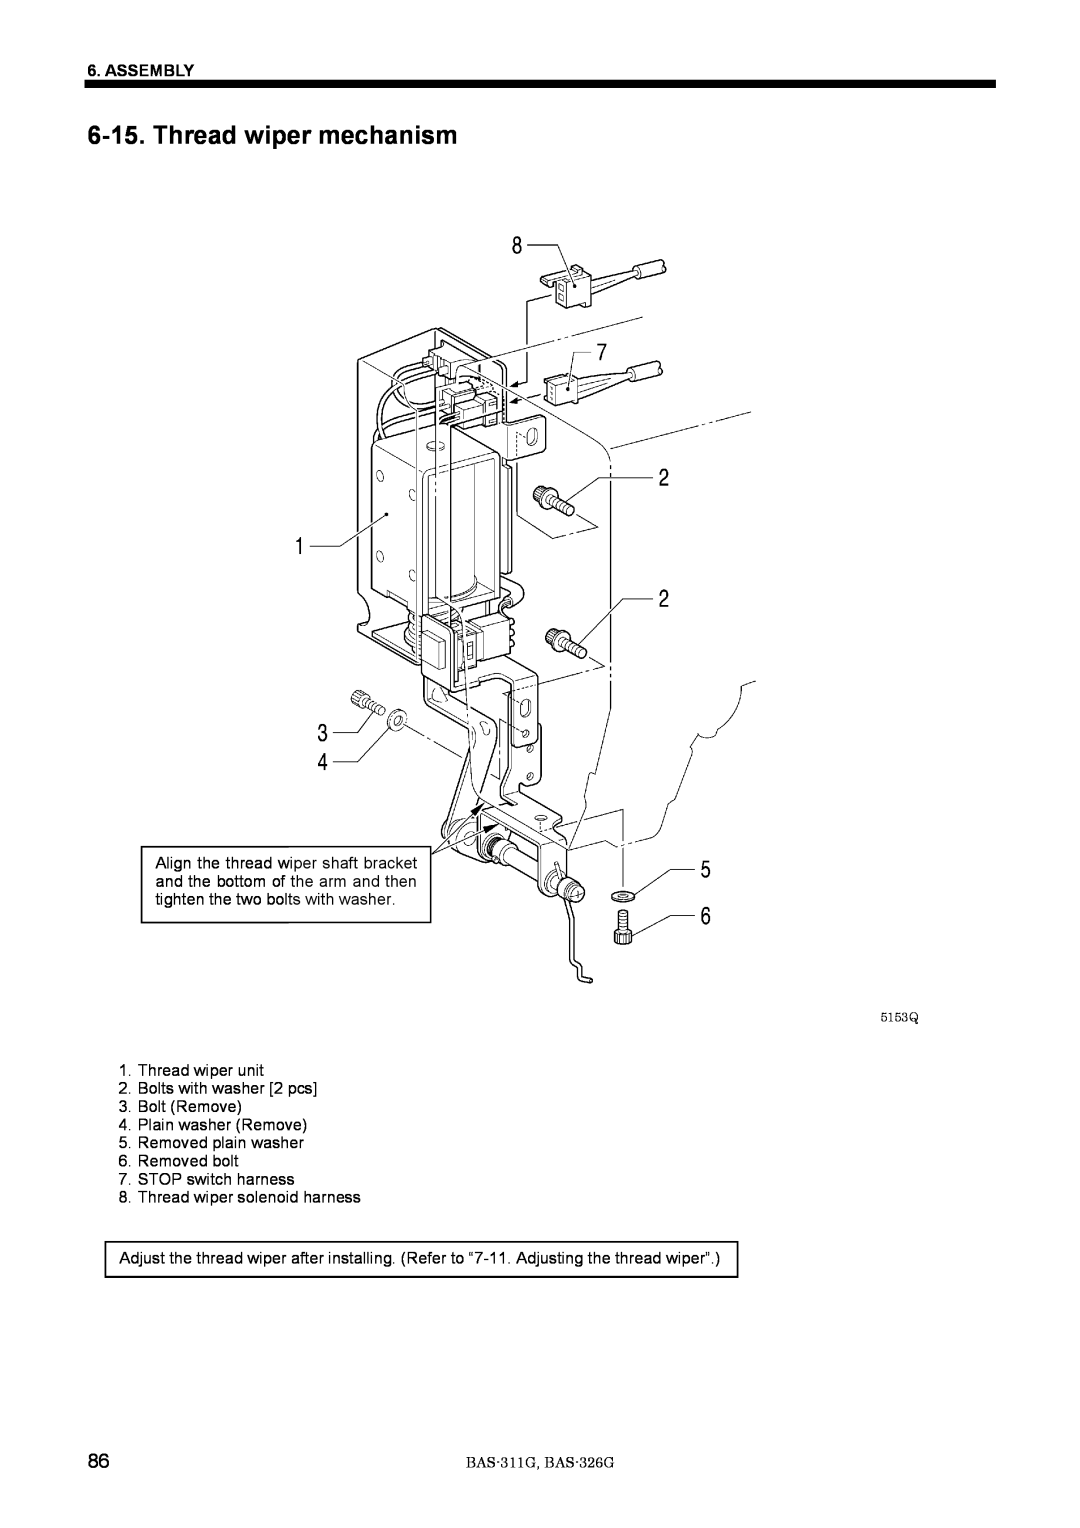 Brother BAS-311G service manual Thread wiper mechanism, Assembly 